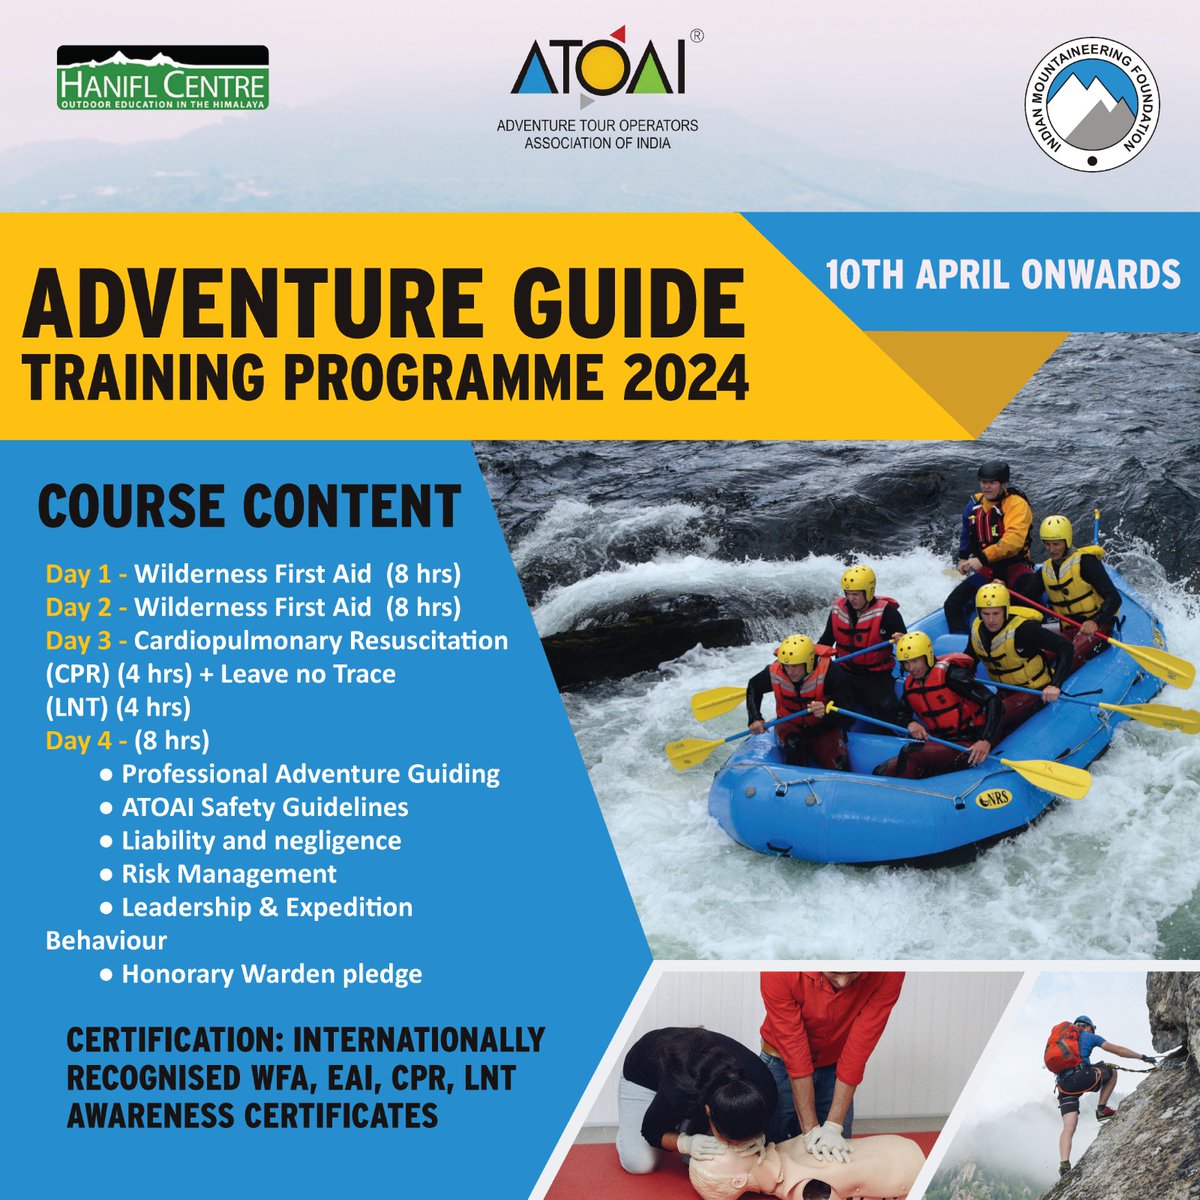 🚨 Adventure Course Highlights - Only 30 Days Left! 🚨 Secure your spot now for this exclusive adventure training program in collaboration with @imf and @hanifl 🔗 Register here: forms.gle/gDYNuj2QbDkt5f… #AdventureTraining #ProfessionalDevelopment #ATOAI #AdventureSkills